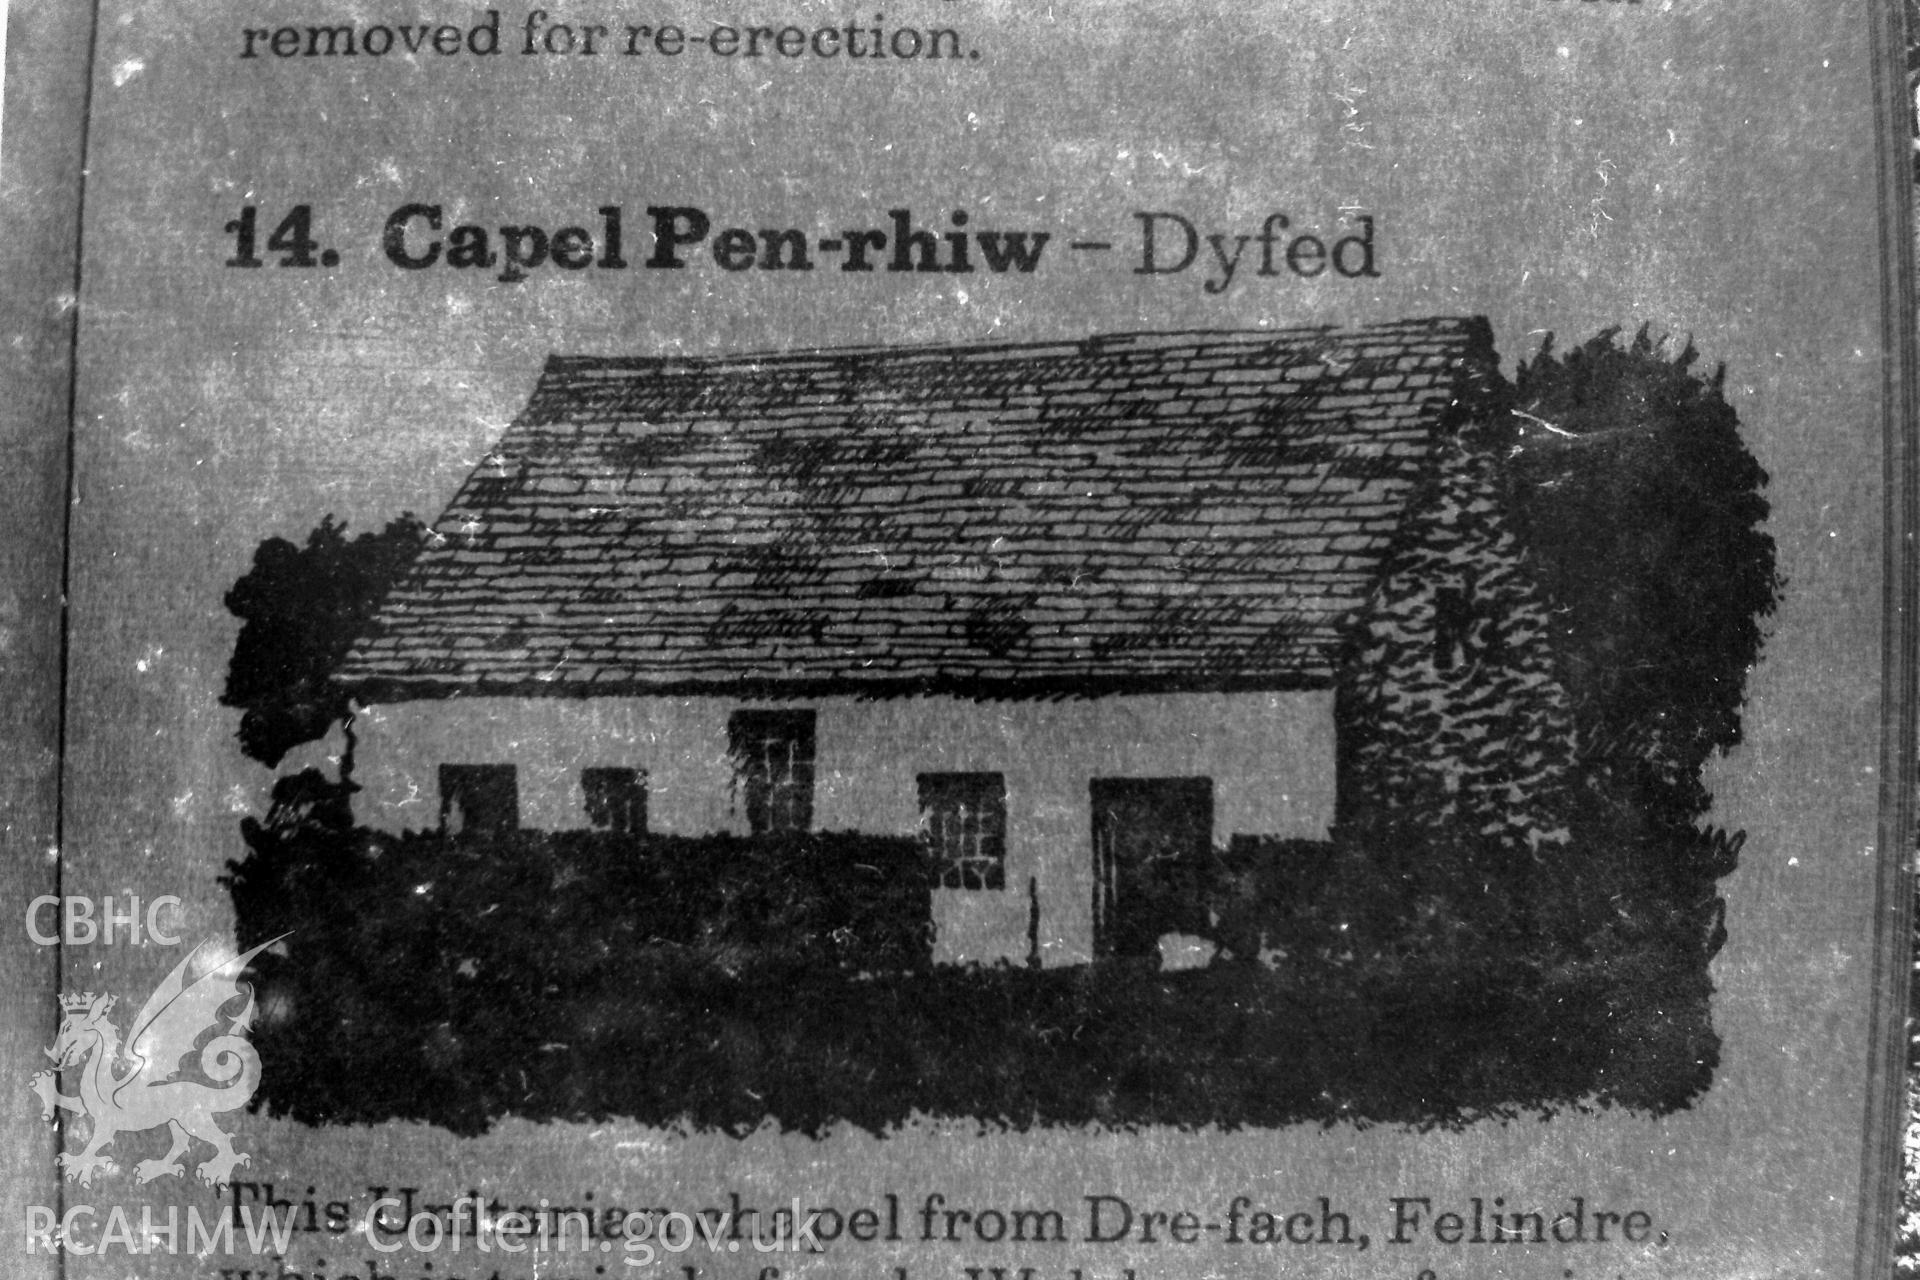 Digitised black and white photograph of Capen Pen-Rhiw, Dre-Fach, Felindre. Now in St. Fagans. Reproduced in Martin Davis' dissertation: 'The Form and Architecture of Nineteenth Century Industrial Settlements in Rural Wales,' 1979. Source unknown.